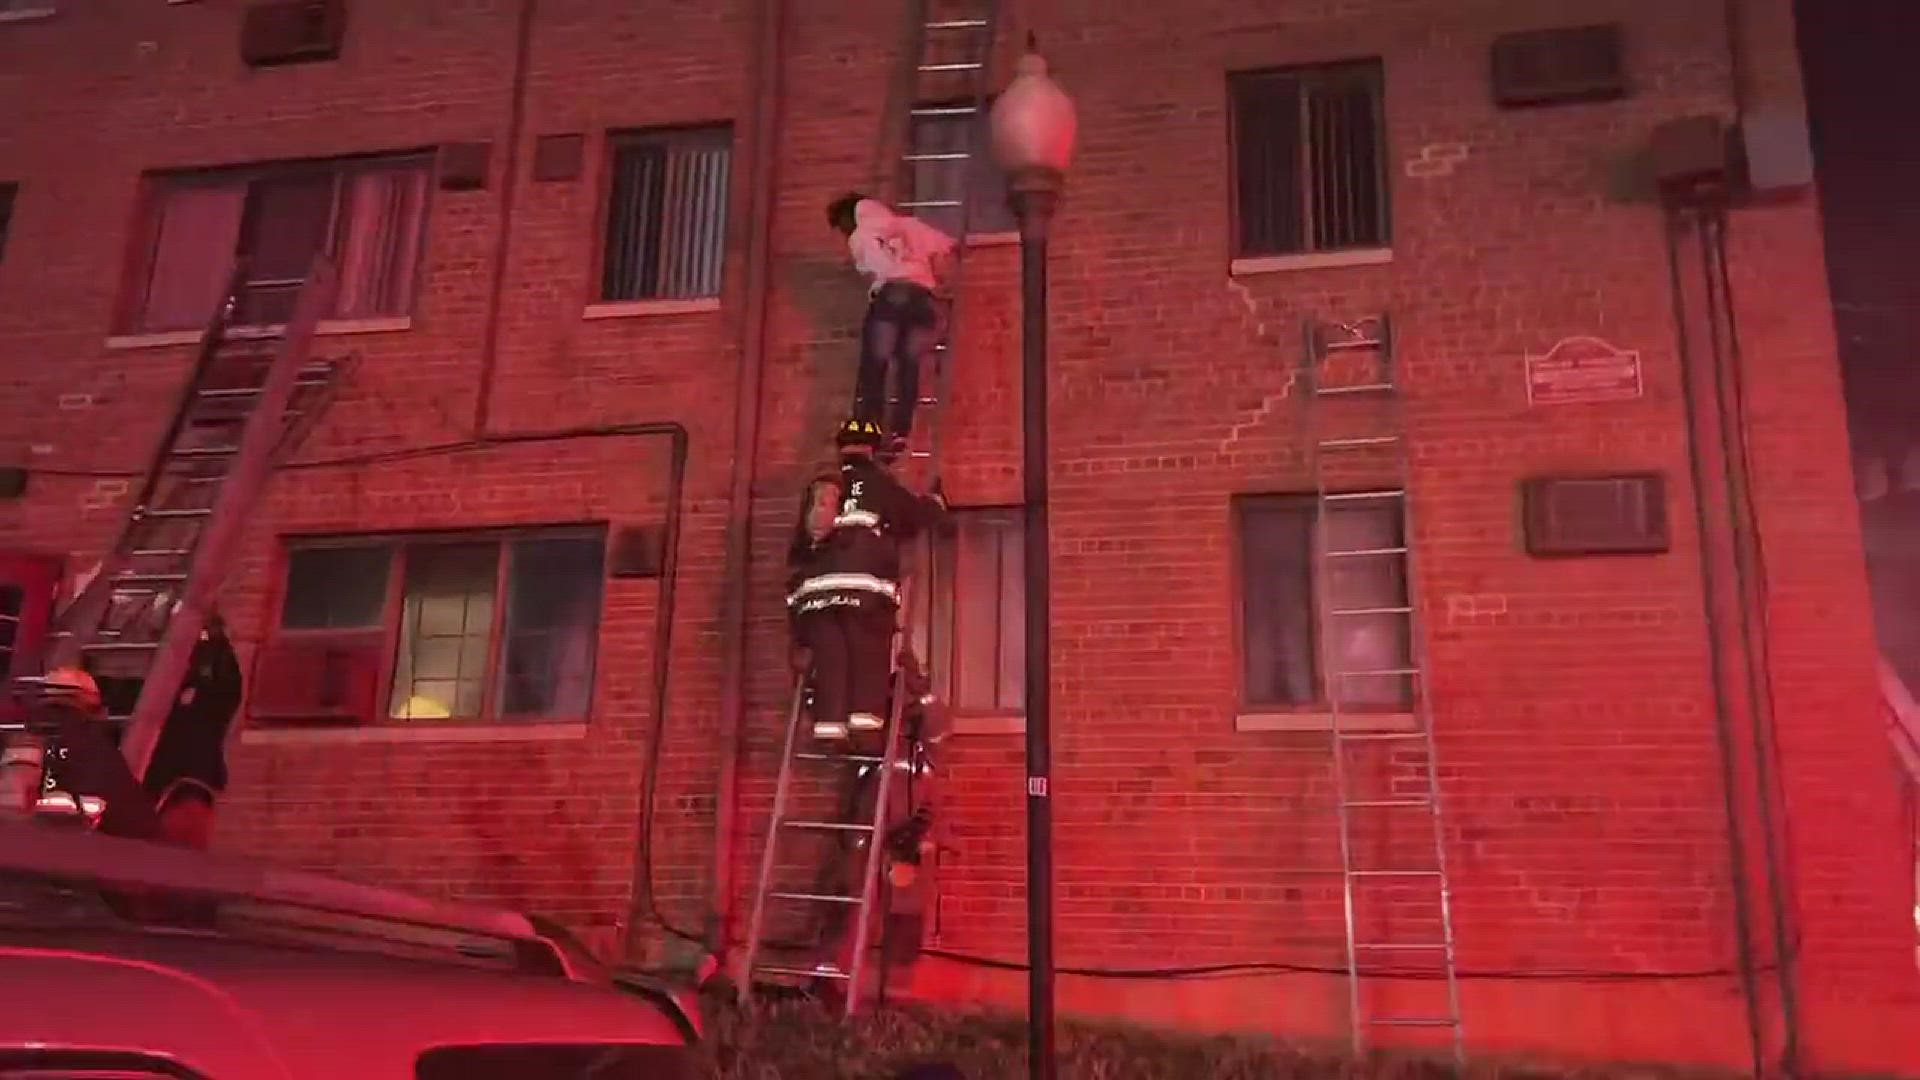 Fire crews rescued multiple people from an apartment fire in SE DC Monday night. (Credit: DC Fire and EMS)